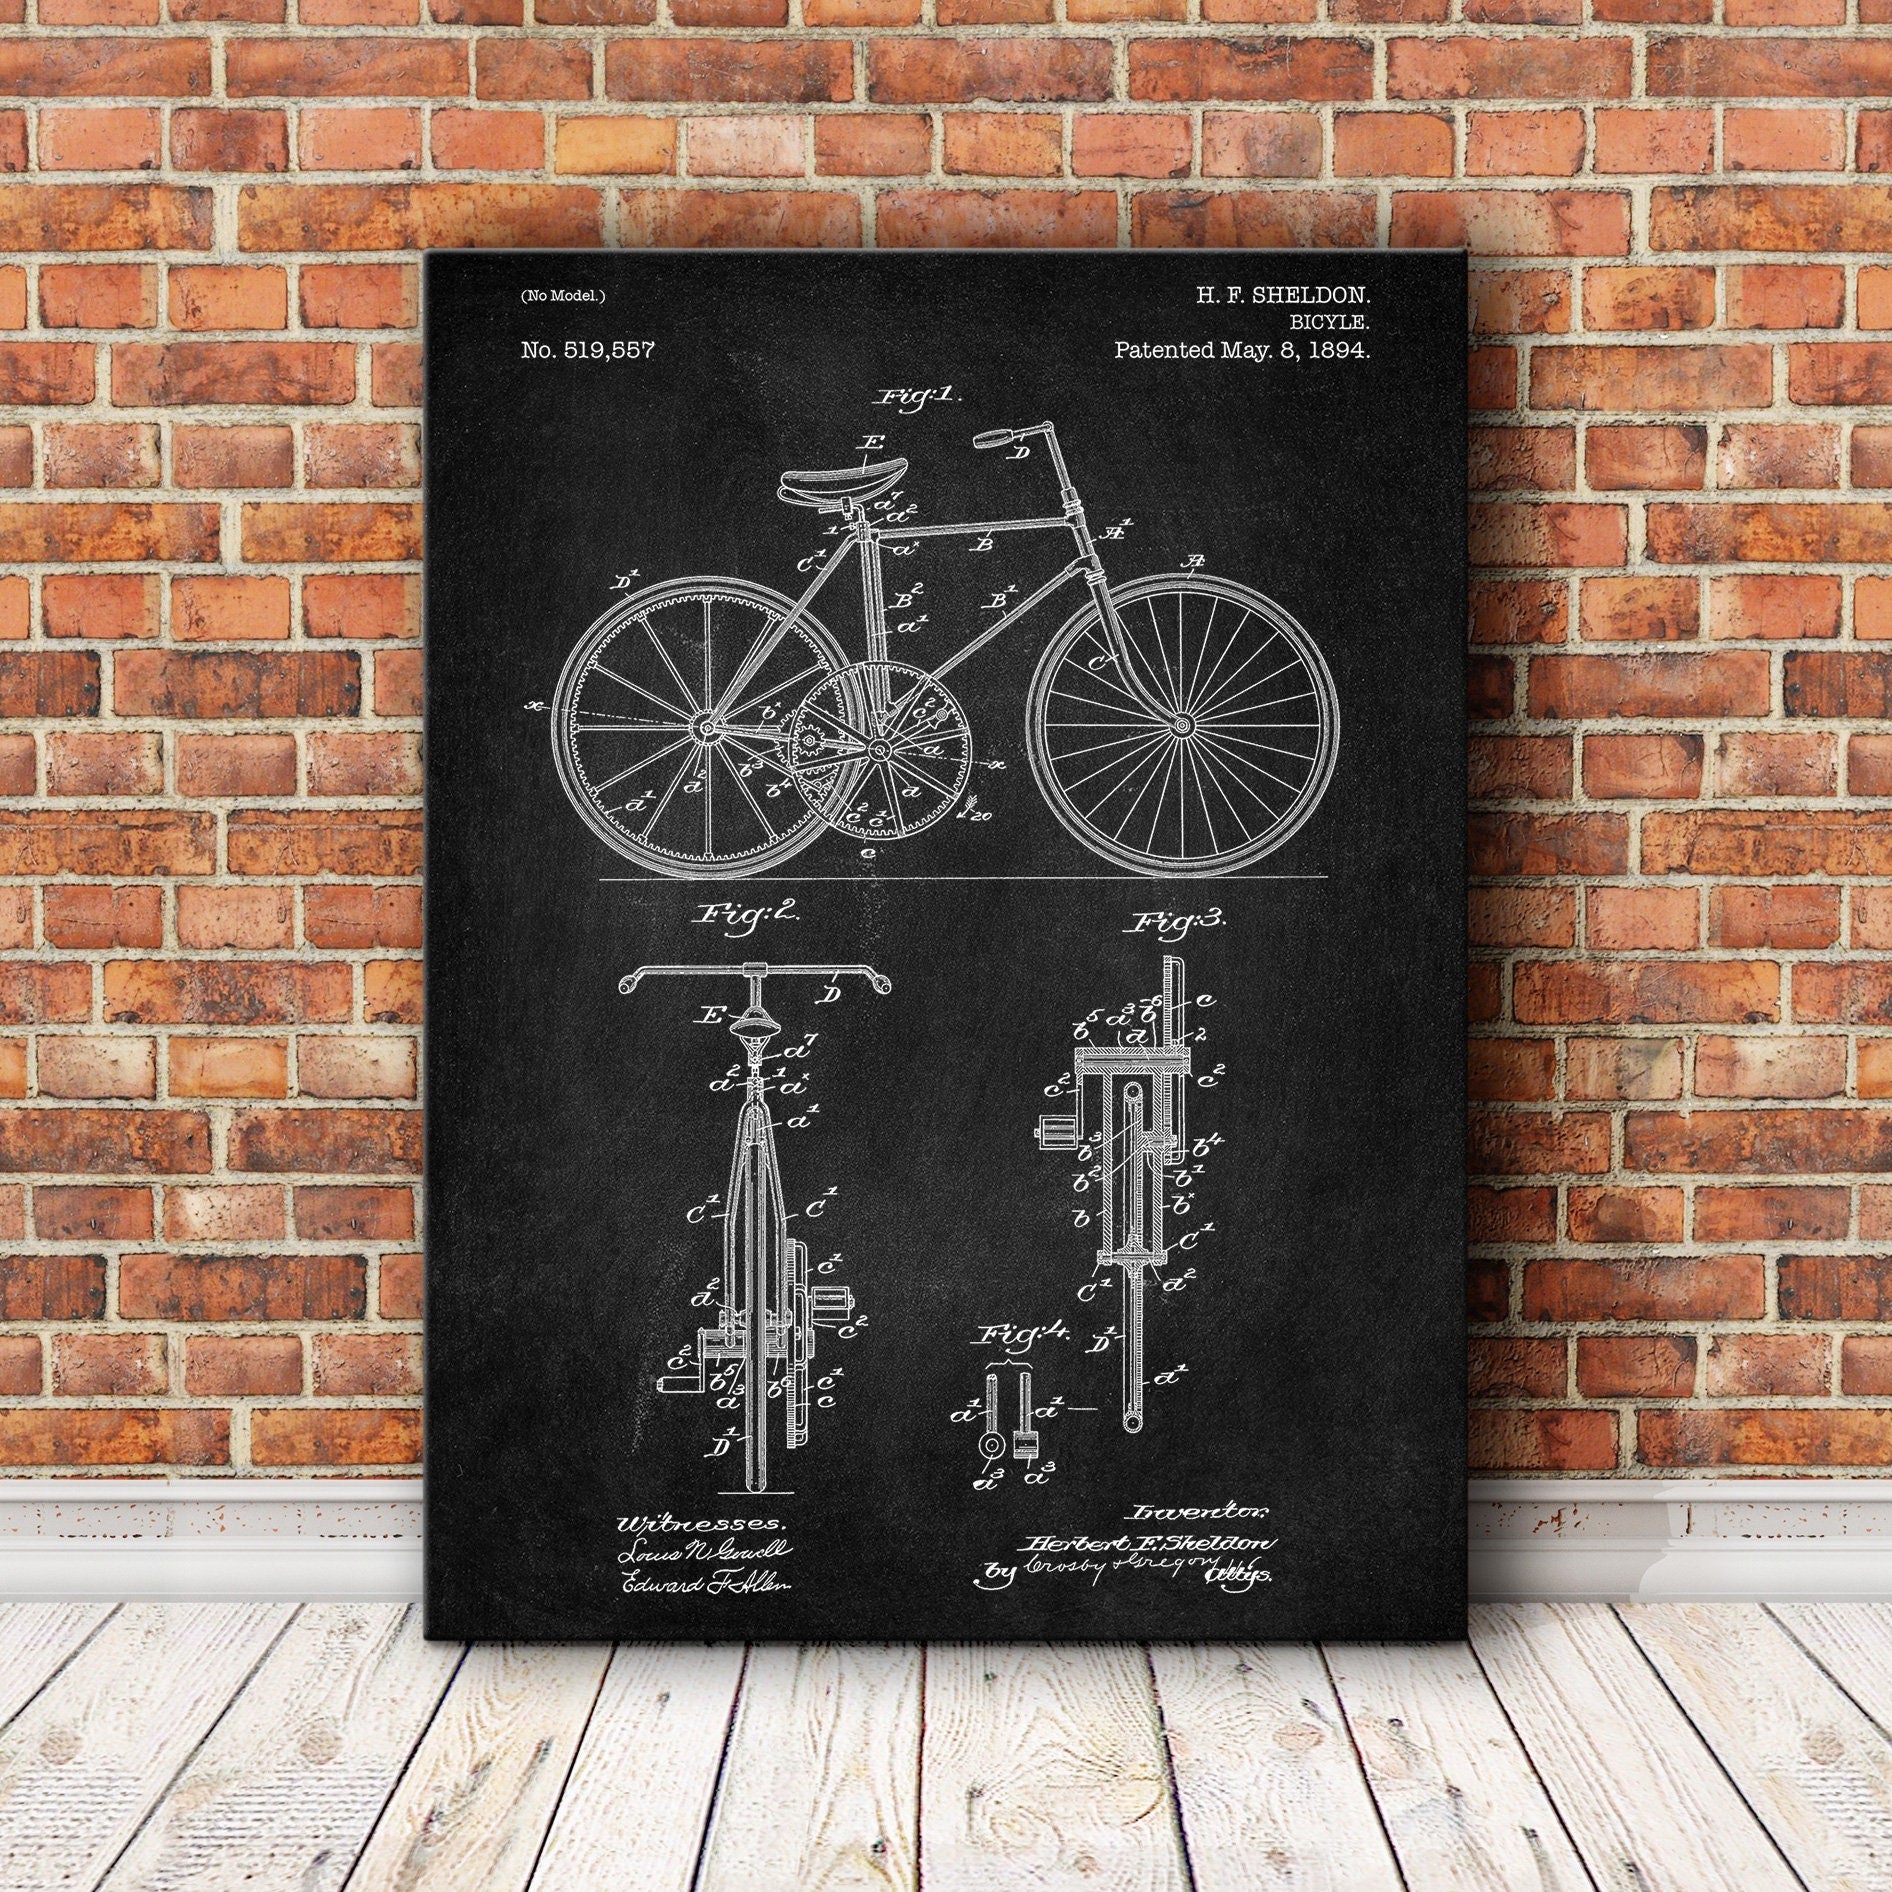 Sports Patent print, Bicycle for Sports Patent print, Patent print, Patent print design, Vintage patent print, Sports Art